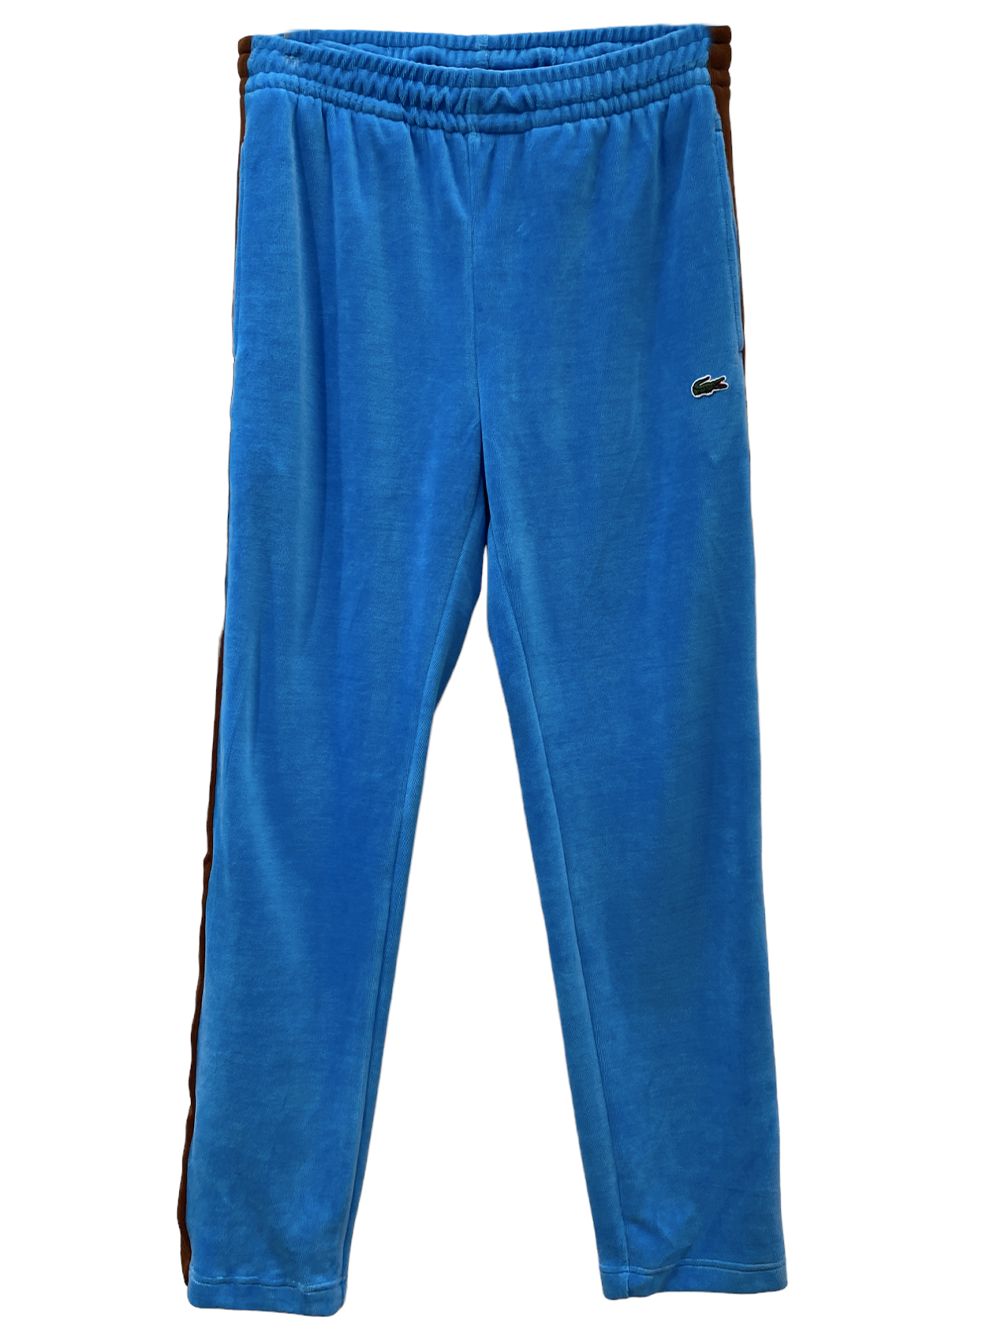 Tracksuit bottoms with contrasting stripes on the sides